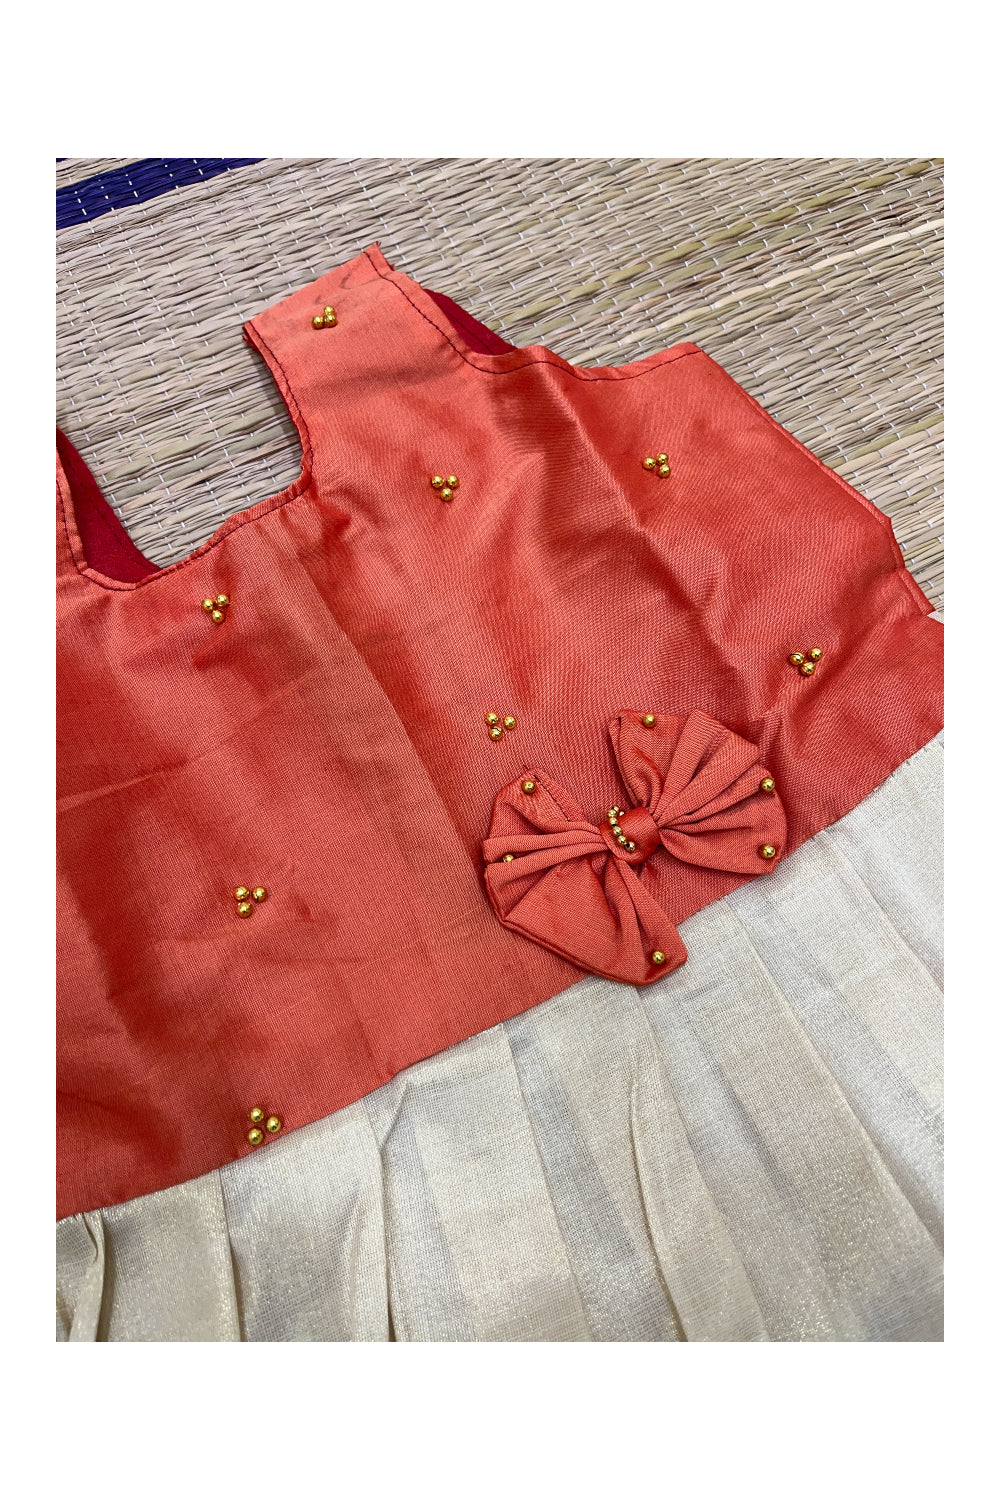 Southloom Kerala Tissue Frock with Peach Bead Work Designs for Kids (4 Years)